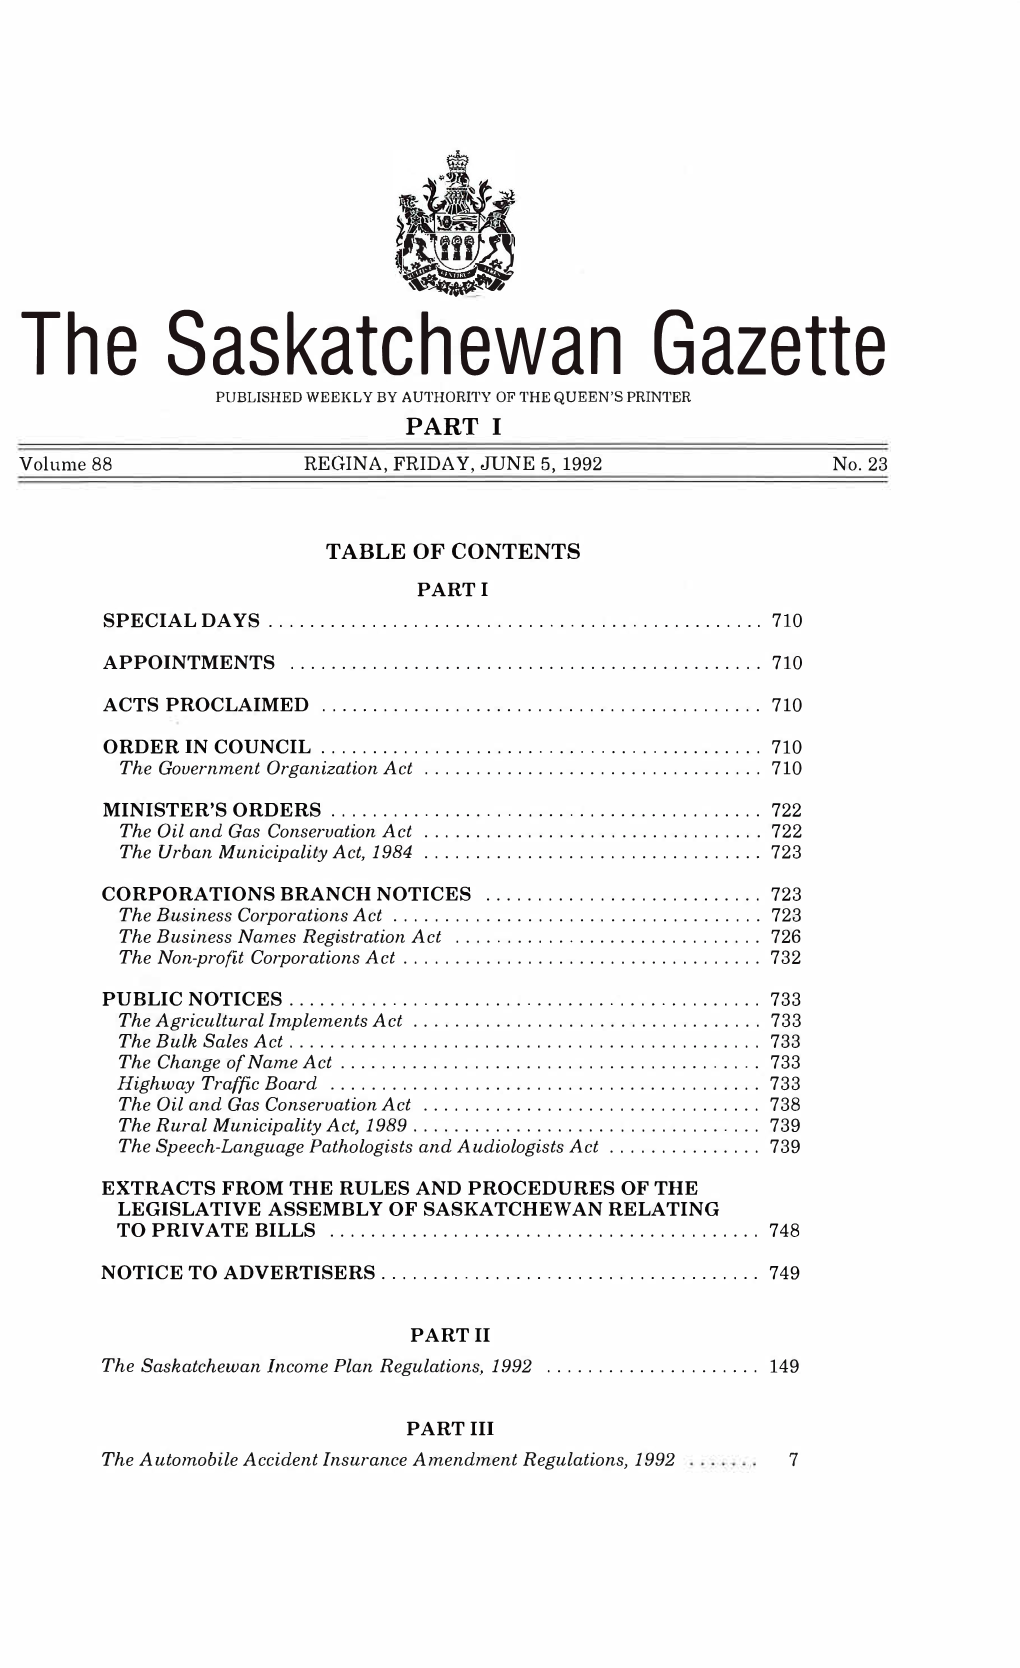 The Saskatchewan Gazette PUBLISHED WEEKLY by AUTHORITY of the QUEEN's PRINTER PART I Volume 88 REGINA, FRIDAY, JUNE 5, 1992 No